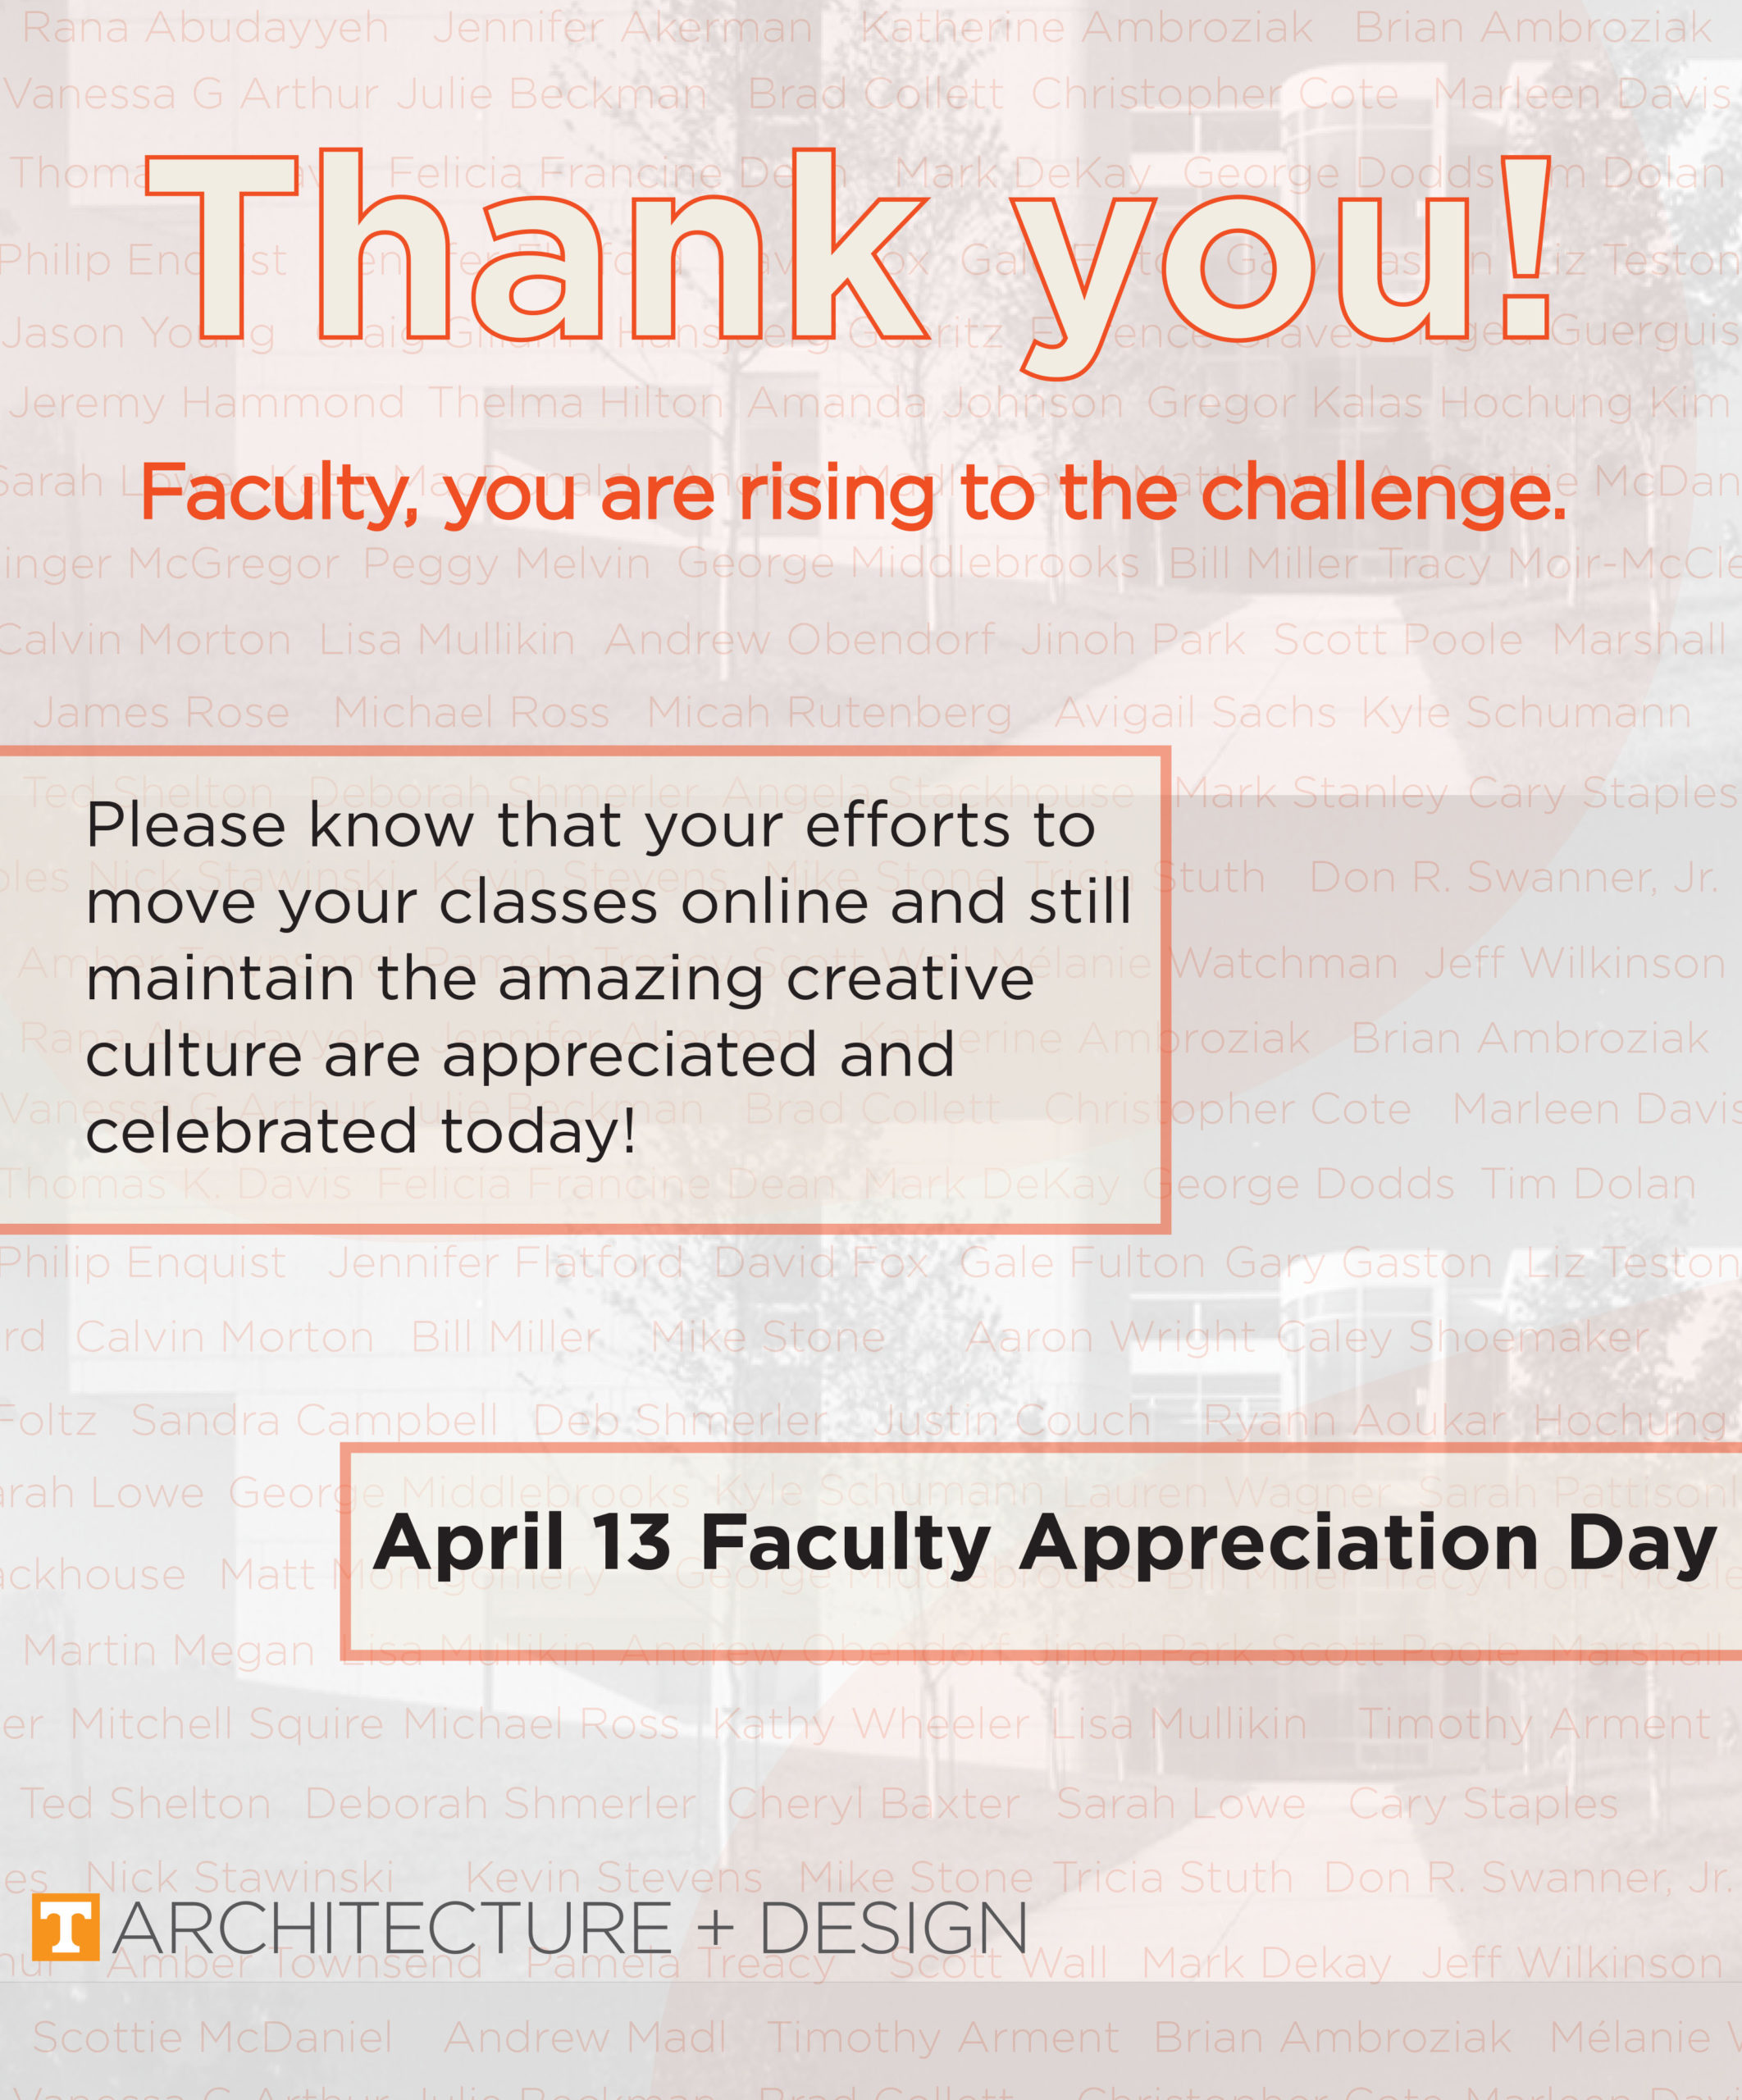 Graphic image thanking faculty